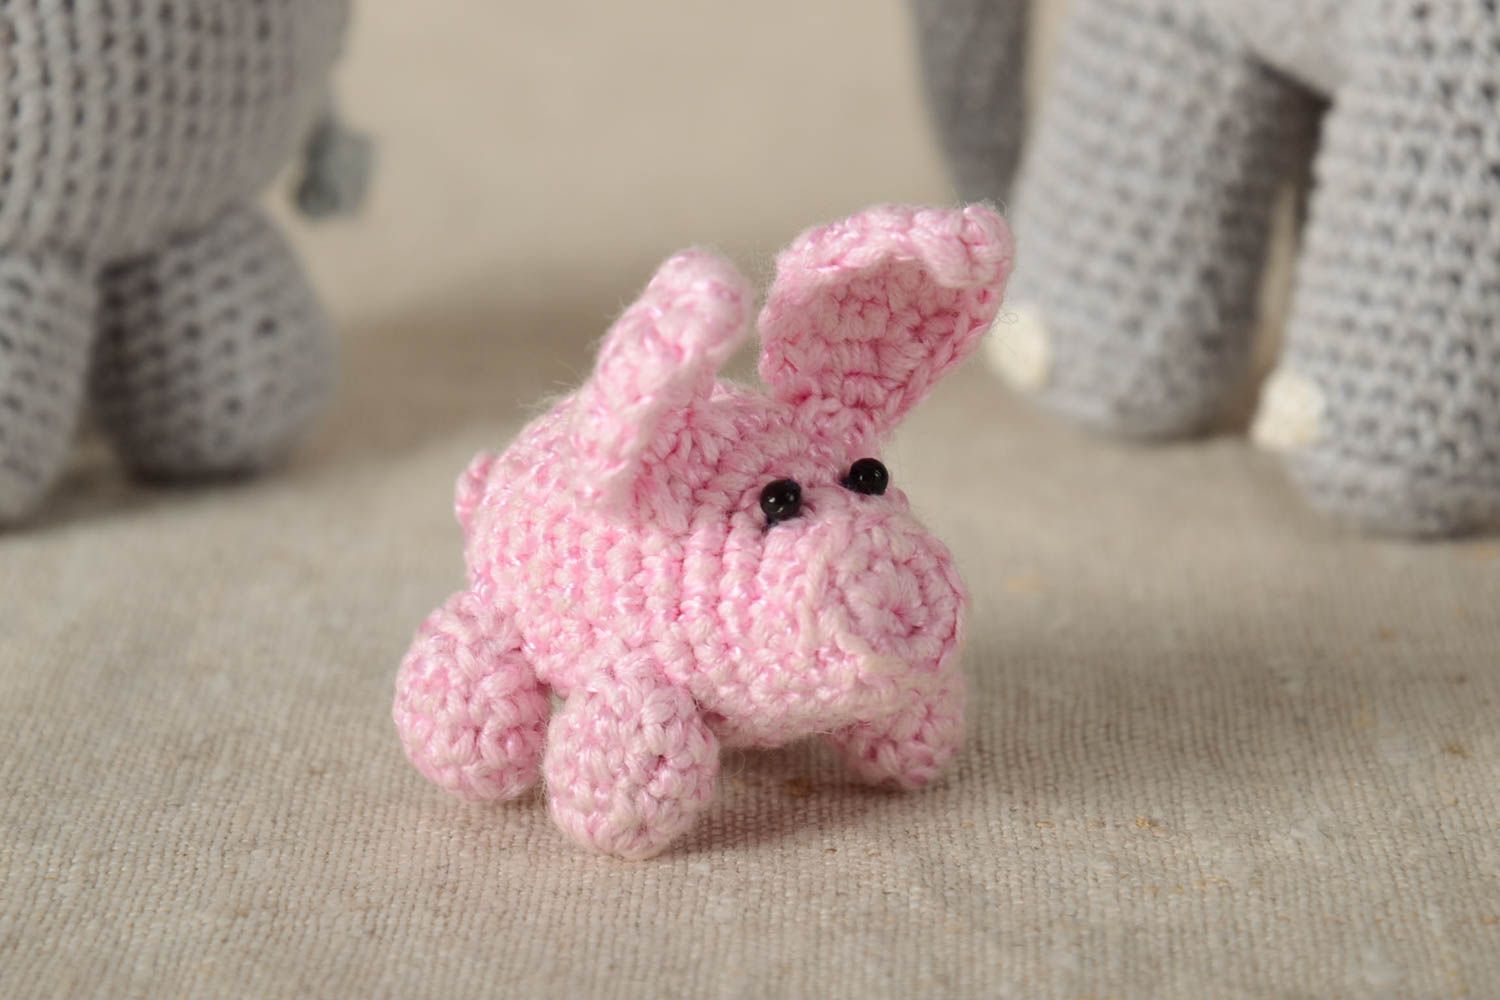 Crocheted pink soft toy cute handmade piglet soft toys children gifts ideas photo 1